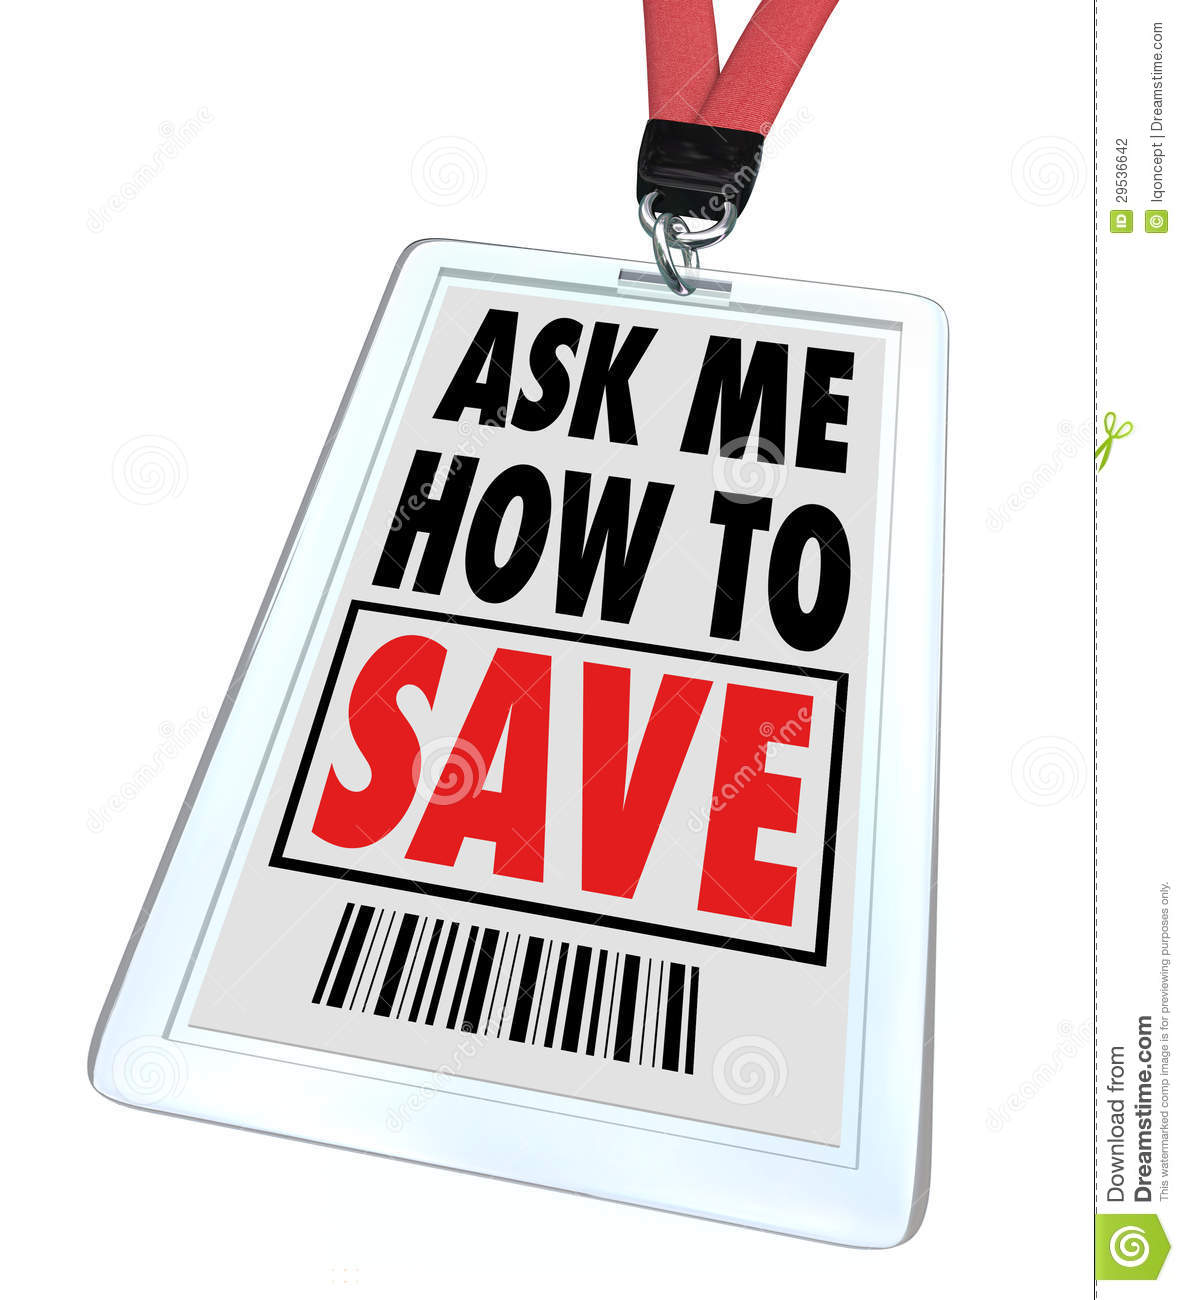 Ask Me How To Save   Lanyard And Badge   Employee Stock Photography    